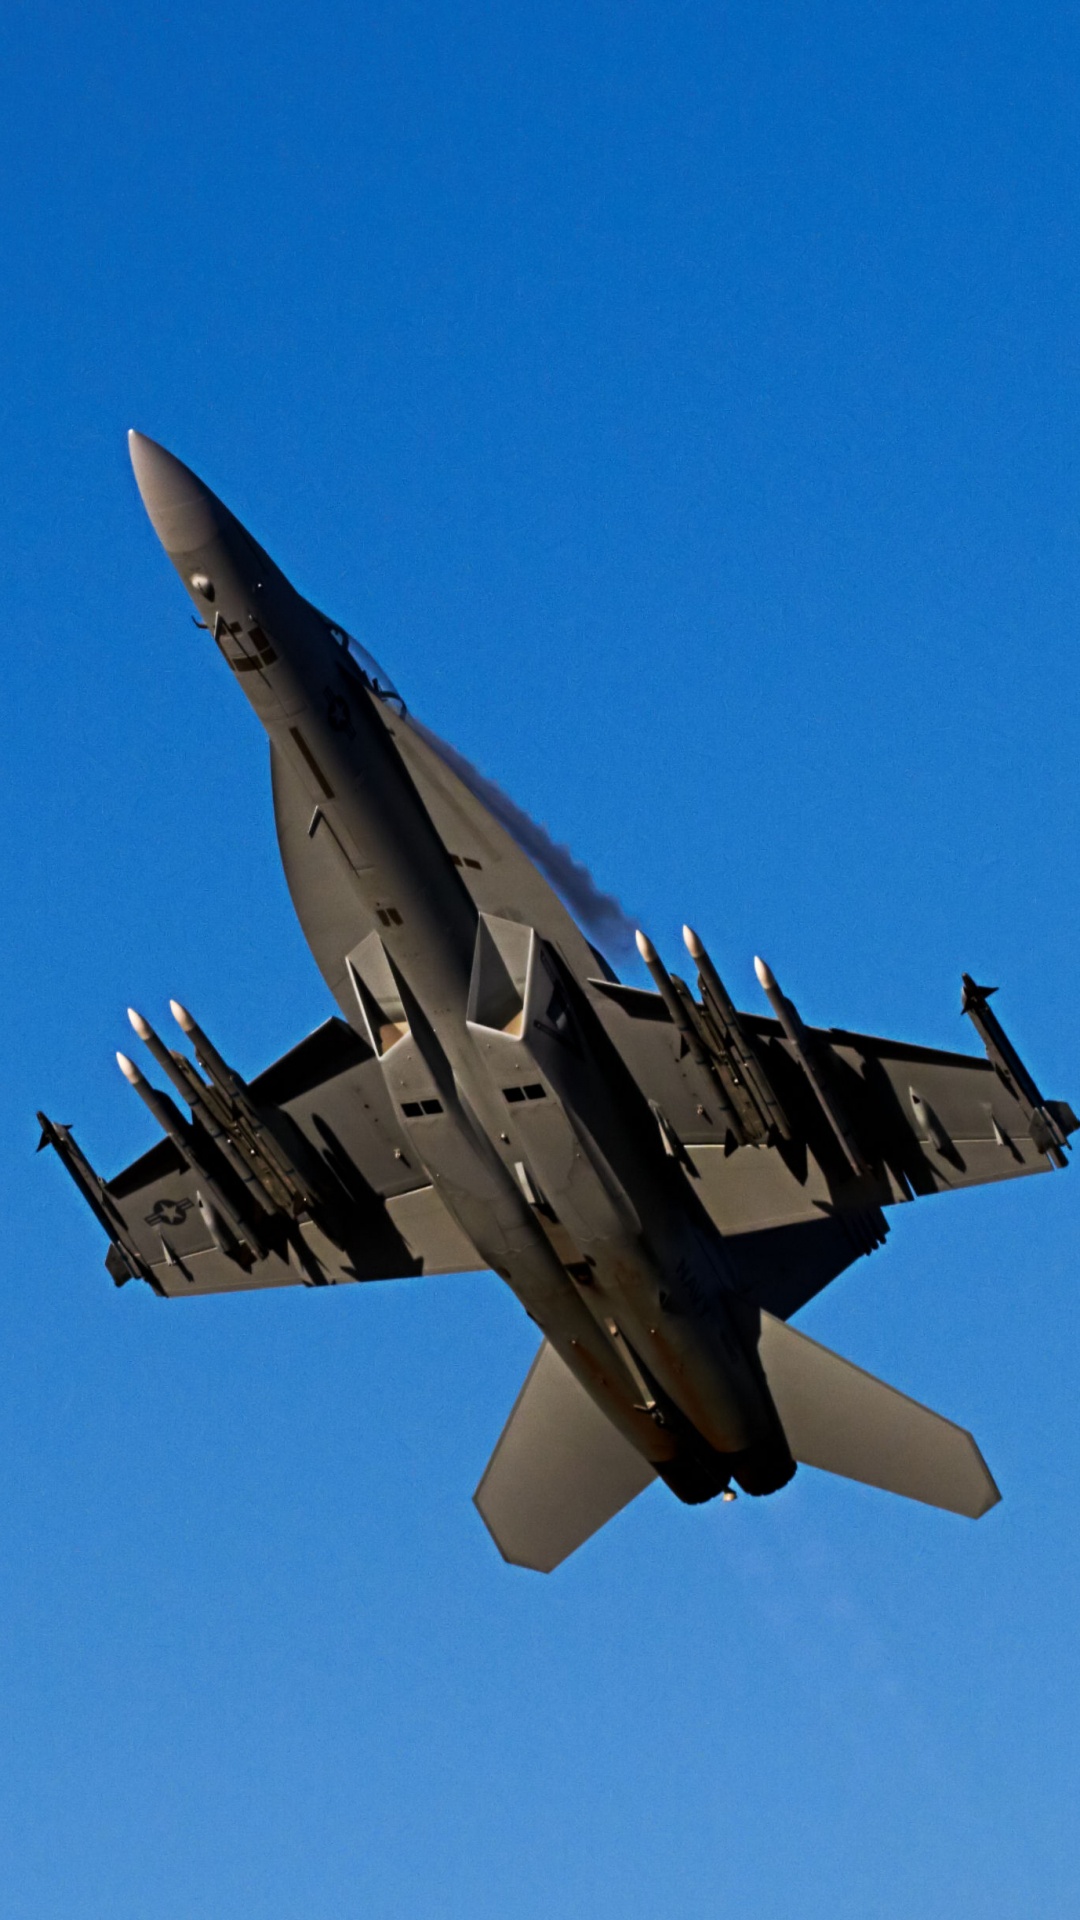 Gray Fighter Jet in Mid Air During Daytime. Wallpaper in 1080x1920 Resolution